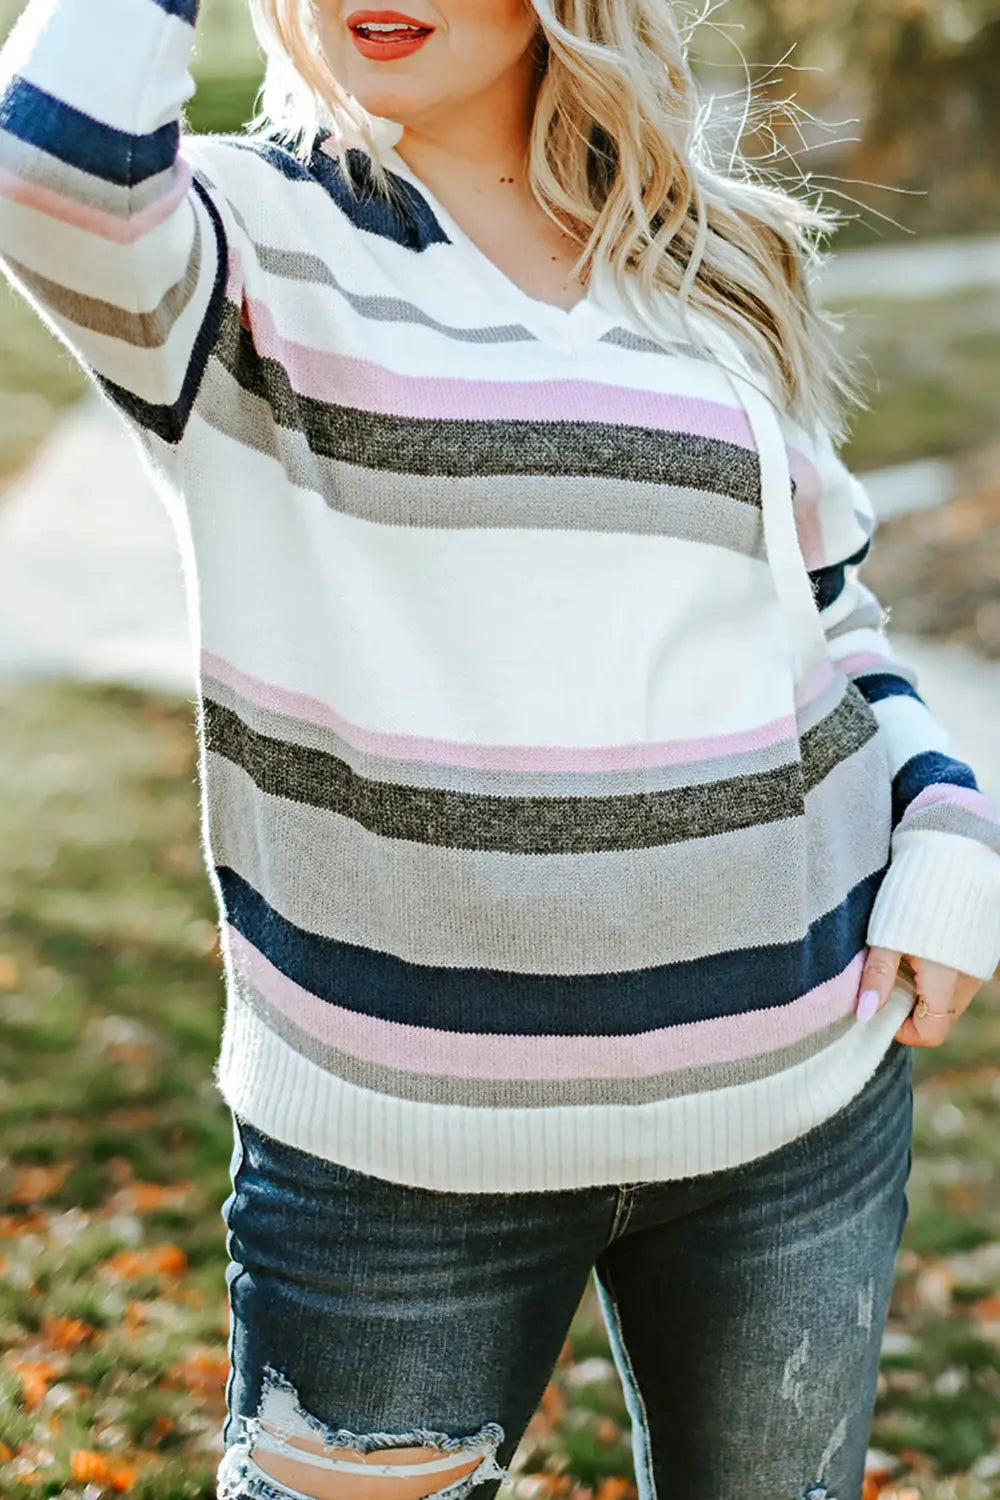 Stripe plus size striped hooded knit sweater - 1x / 65% acrylic + 35% polyester